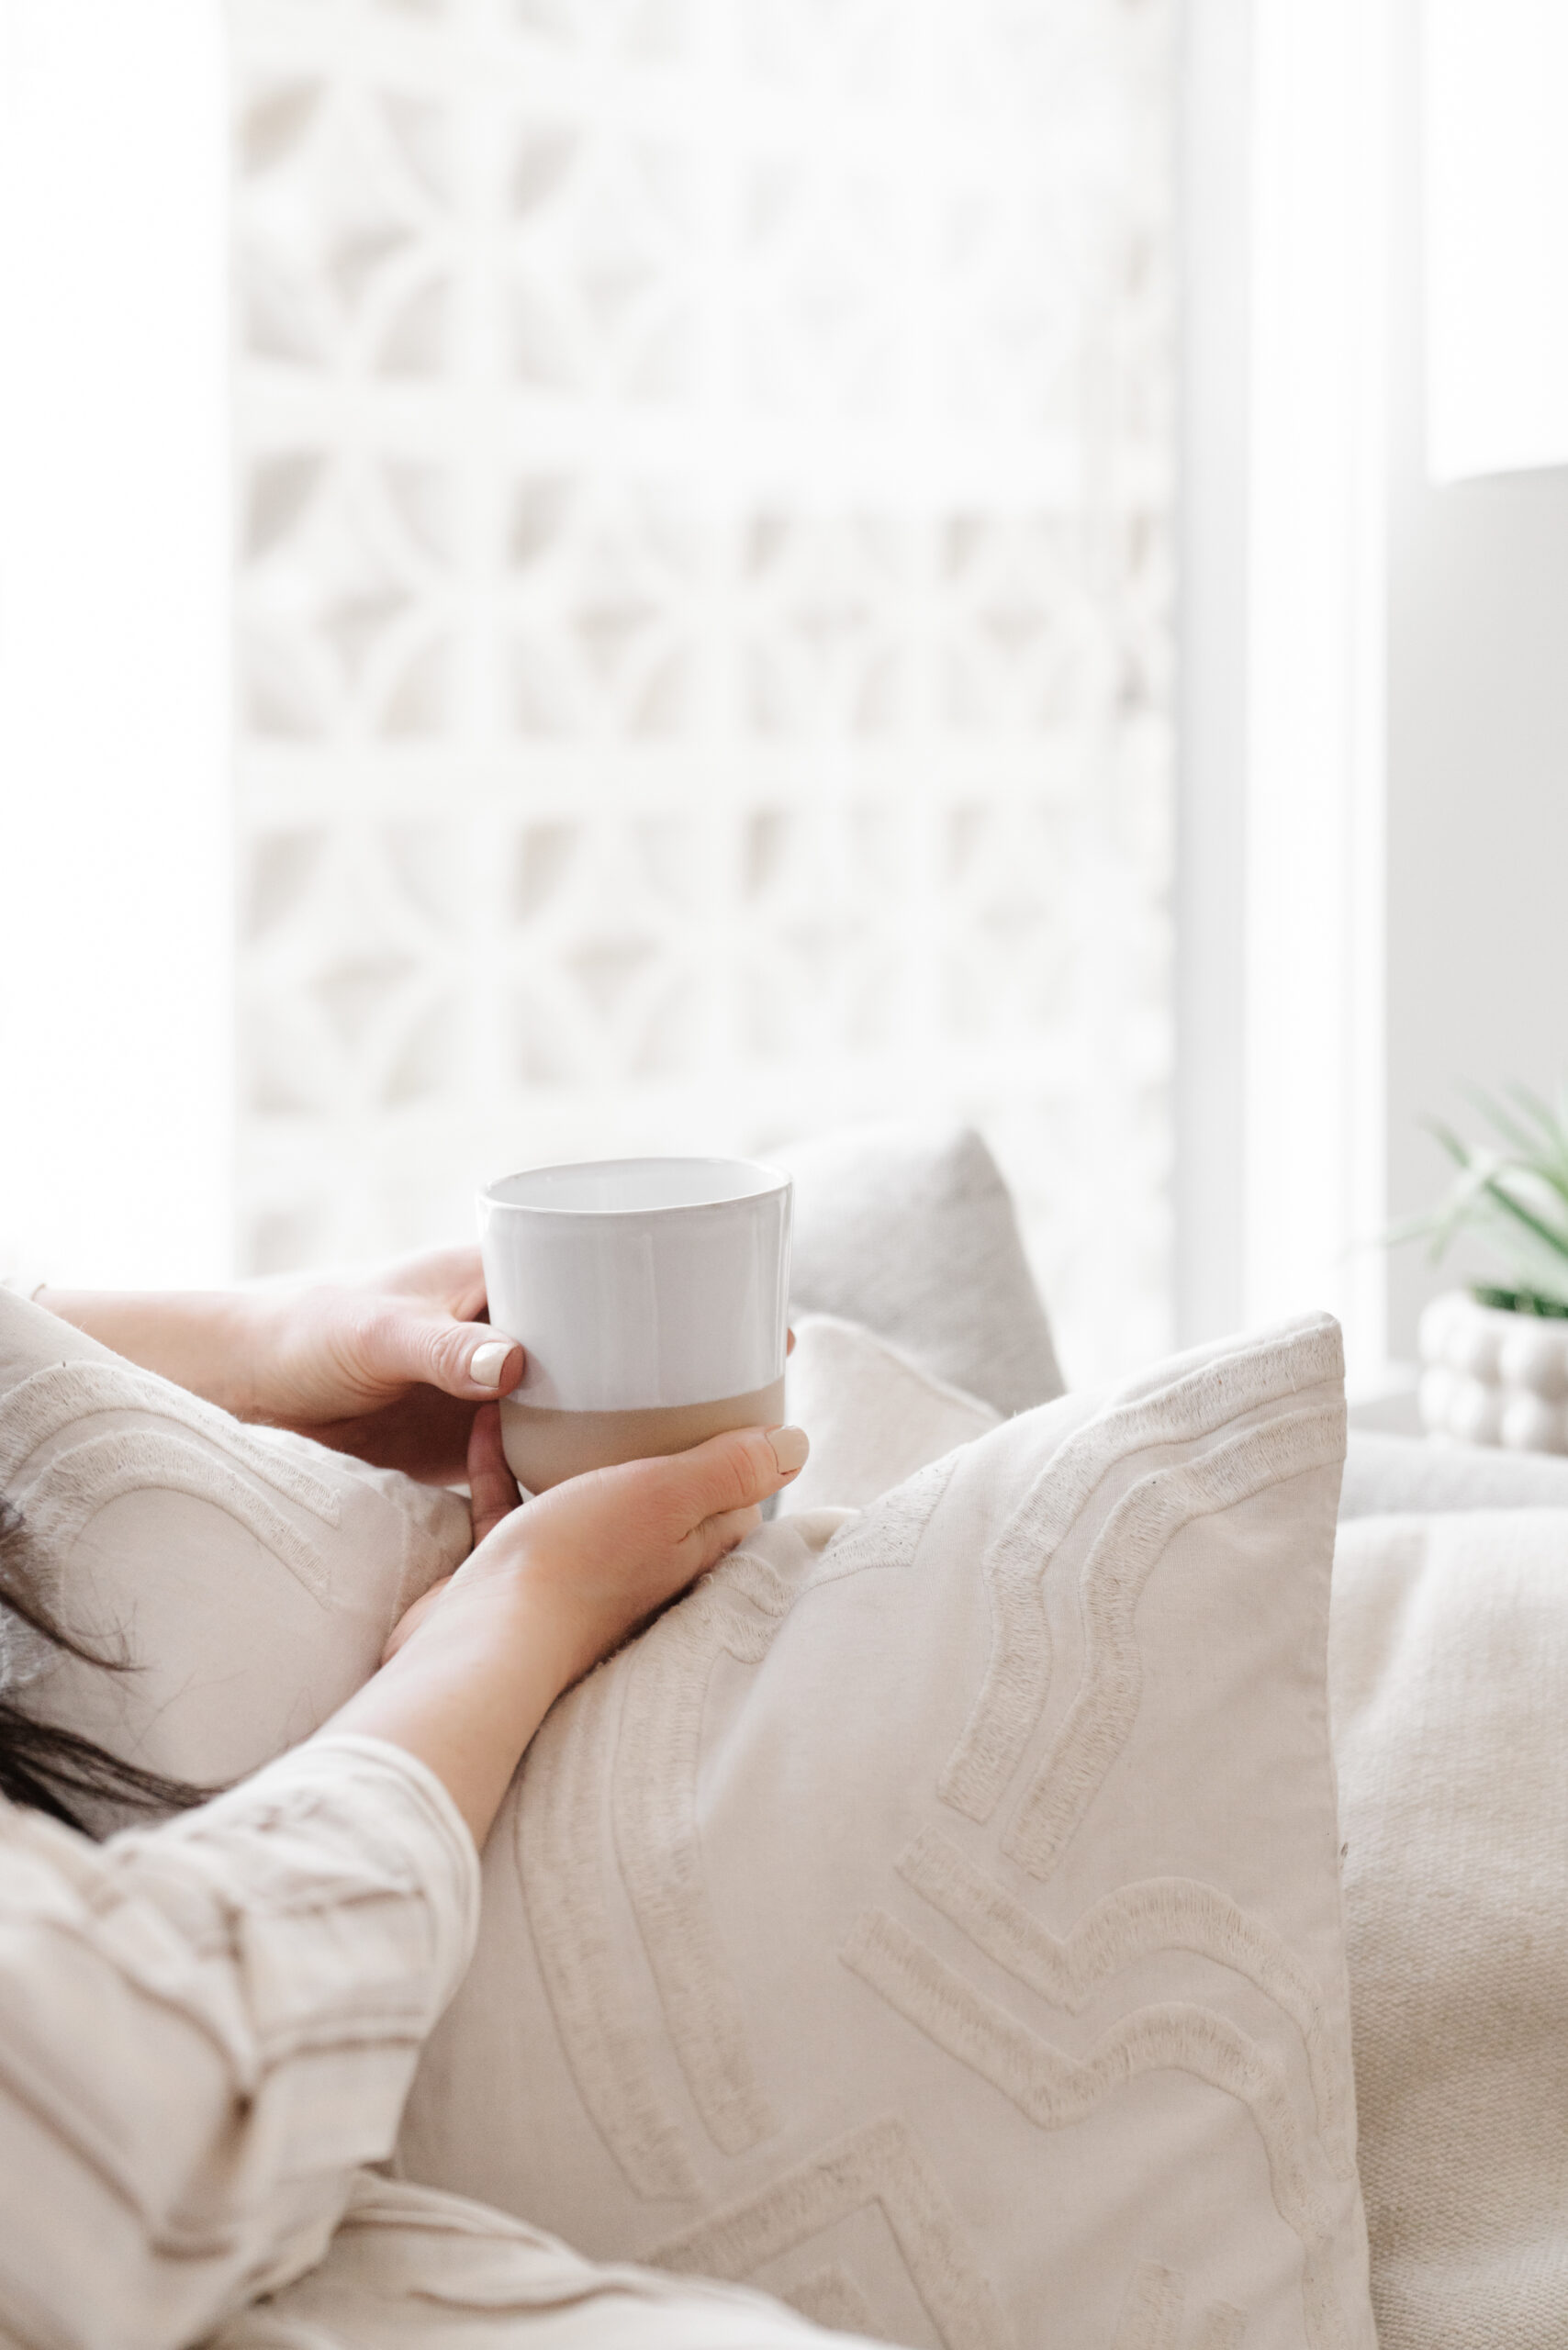 This image shows a woman holding a cup of coffee on a couch. In this episode, Jordan talks with author Jess Connolly about the importance of rest.